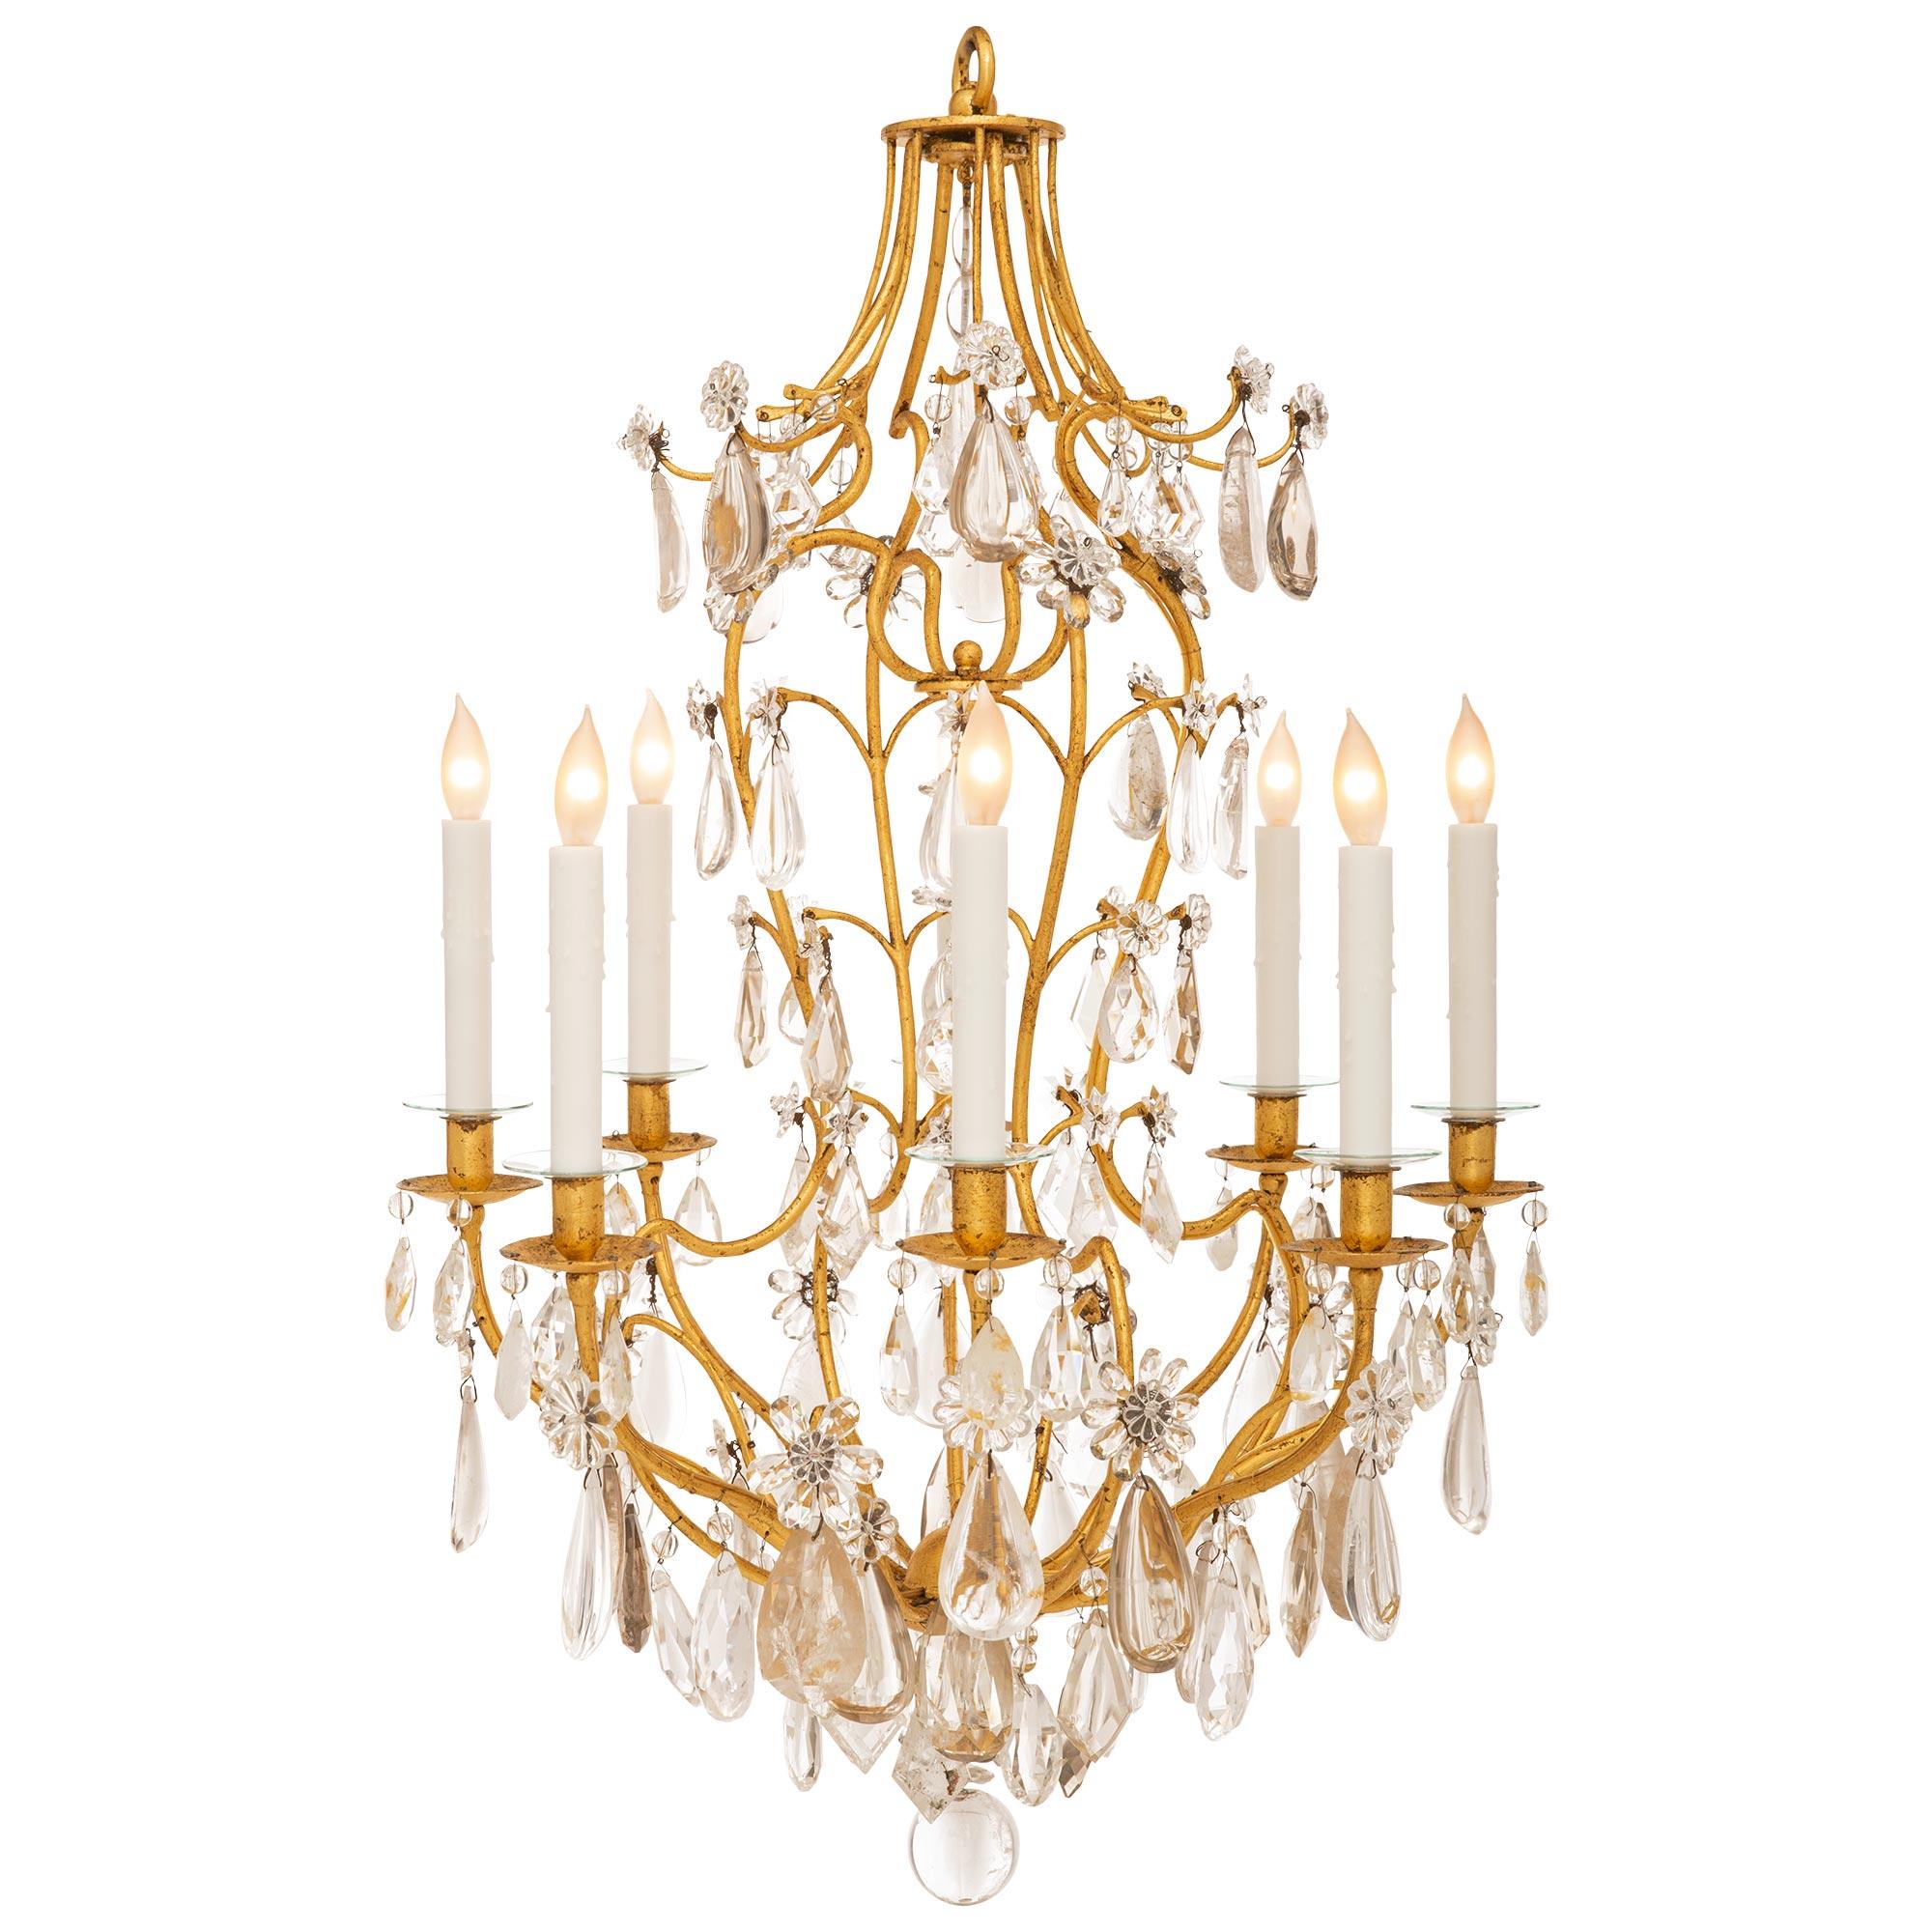 A very attractive French 19th century Gilt Iron, crystal and rock crystal chandelier. The eight arm chandelier is centered by a most decorative bottom crystal ball below the eight gilt iron arms adorned with lovely teardrop, pear shaped, cut, and